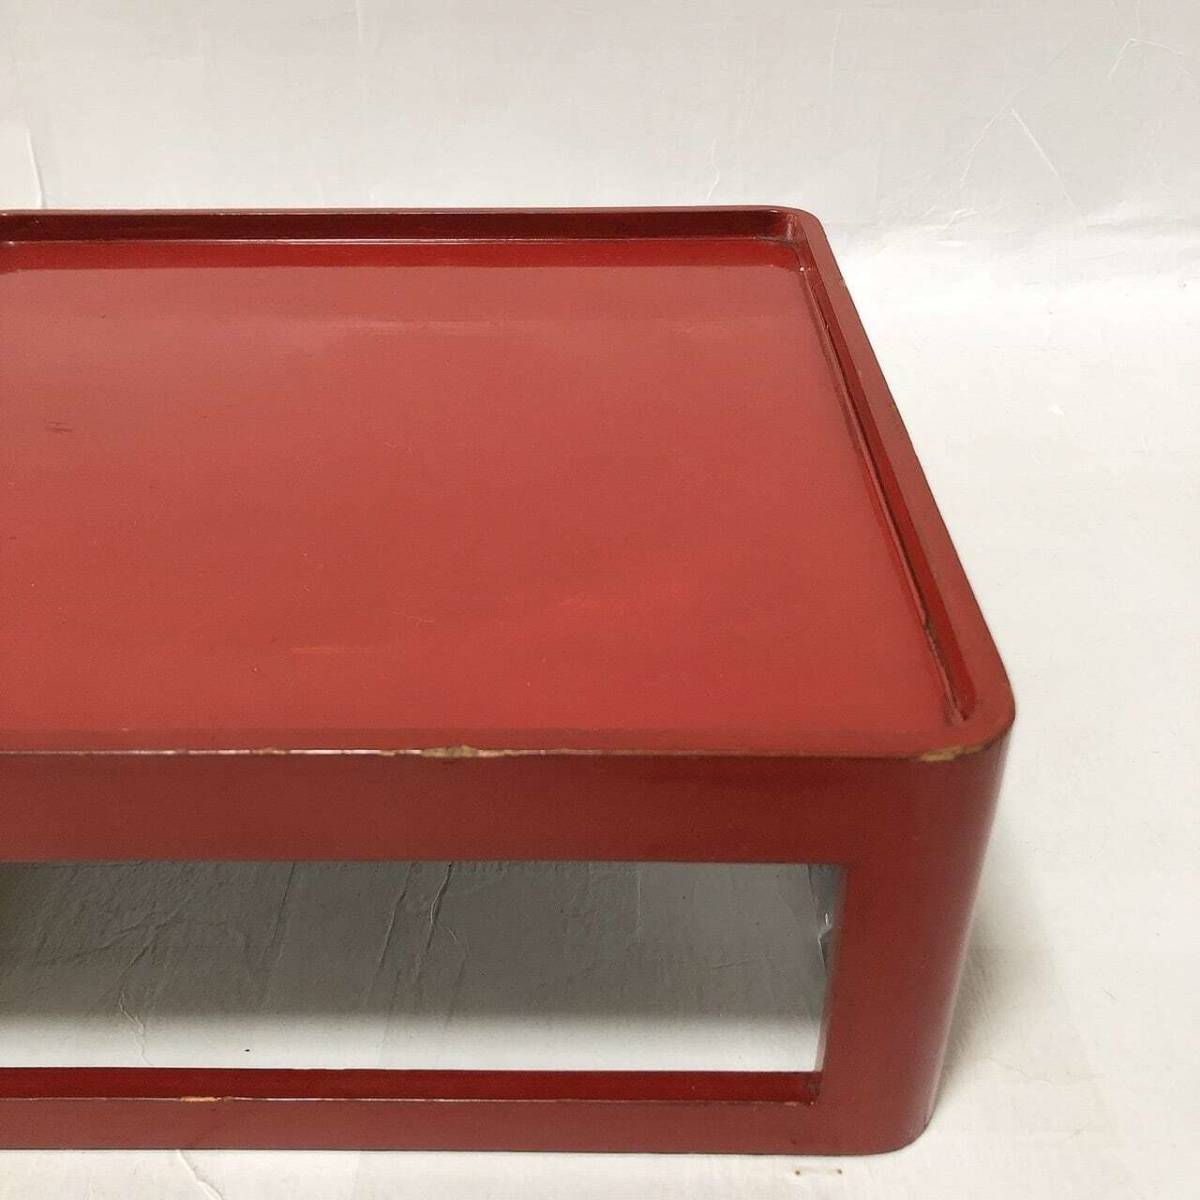  free shipping! antique . lacquer coating . serving tray handicraft .. wood 